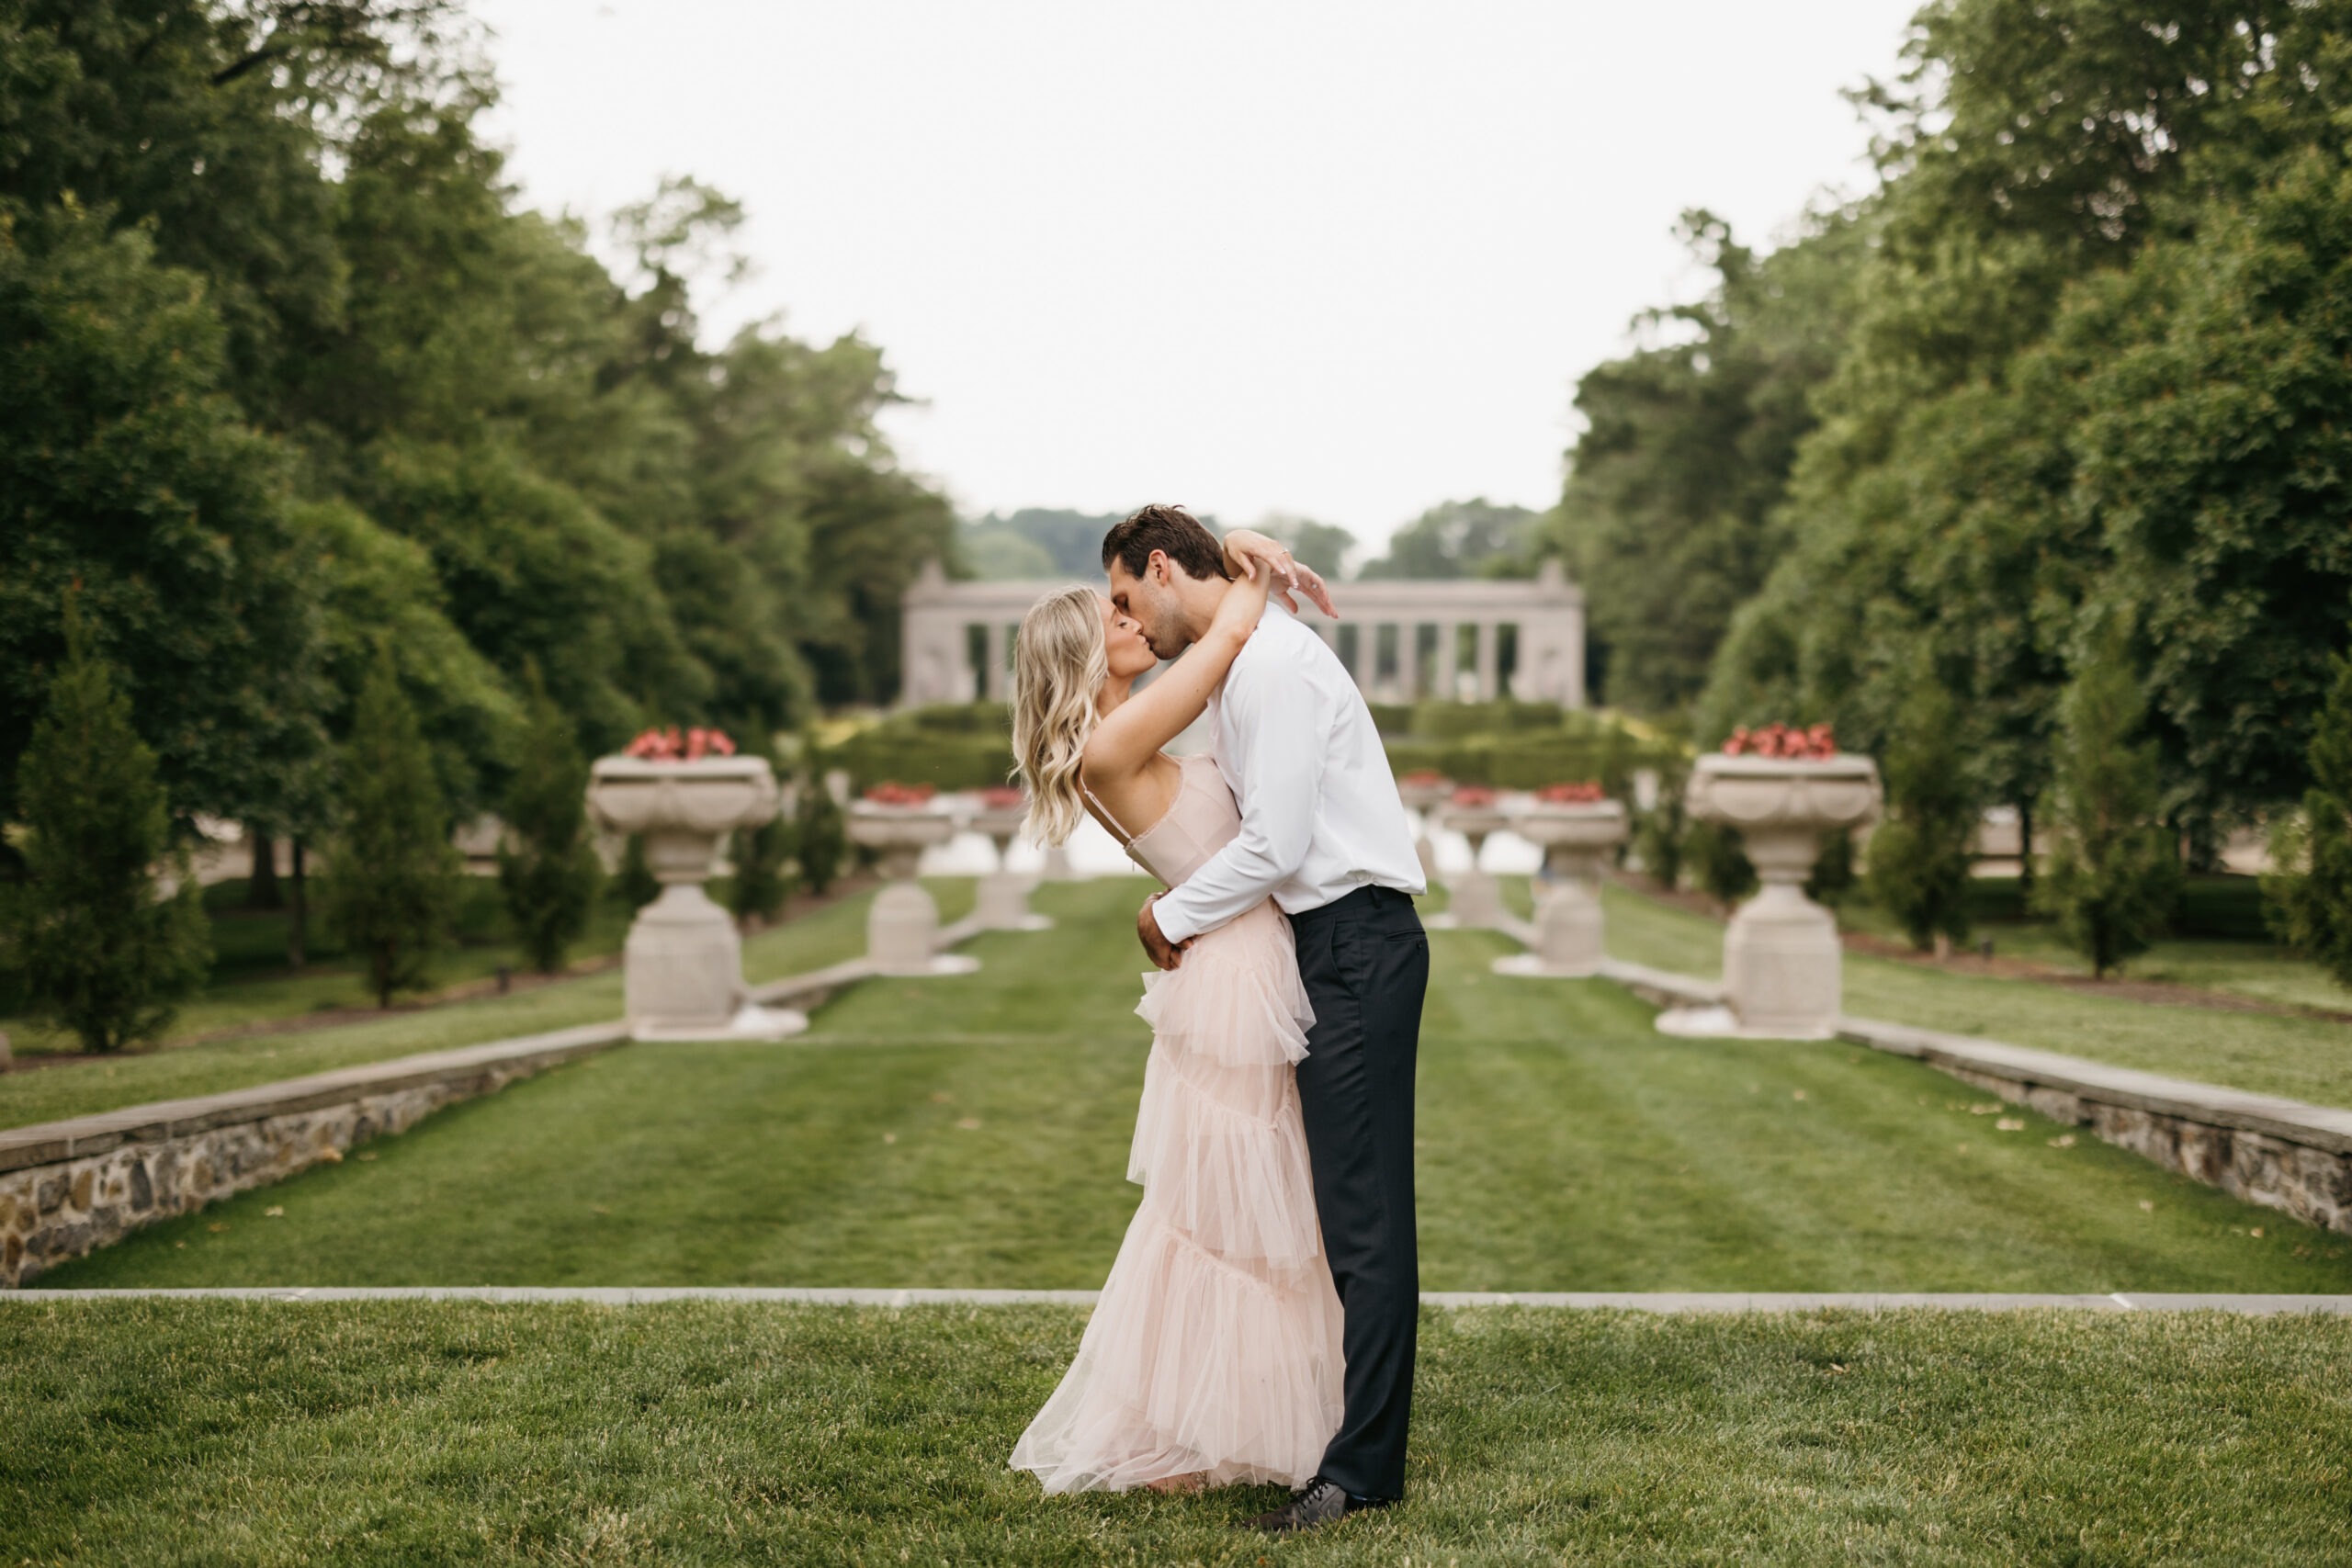 This Nemours Estate engagement session was everything! This estate is a French neoclassical mansion located in Wilmington, DE that was built to resemble a French château. It truly made us feel like we jet set to France for their engagement session.